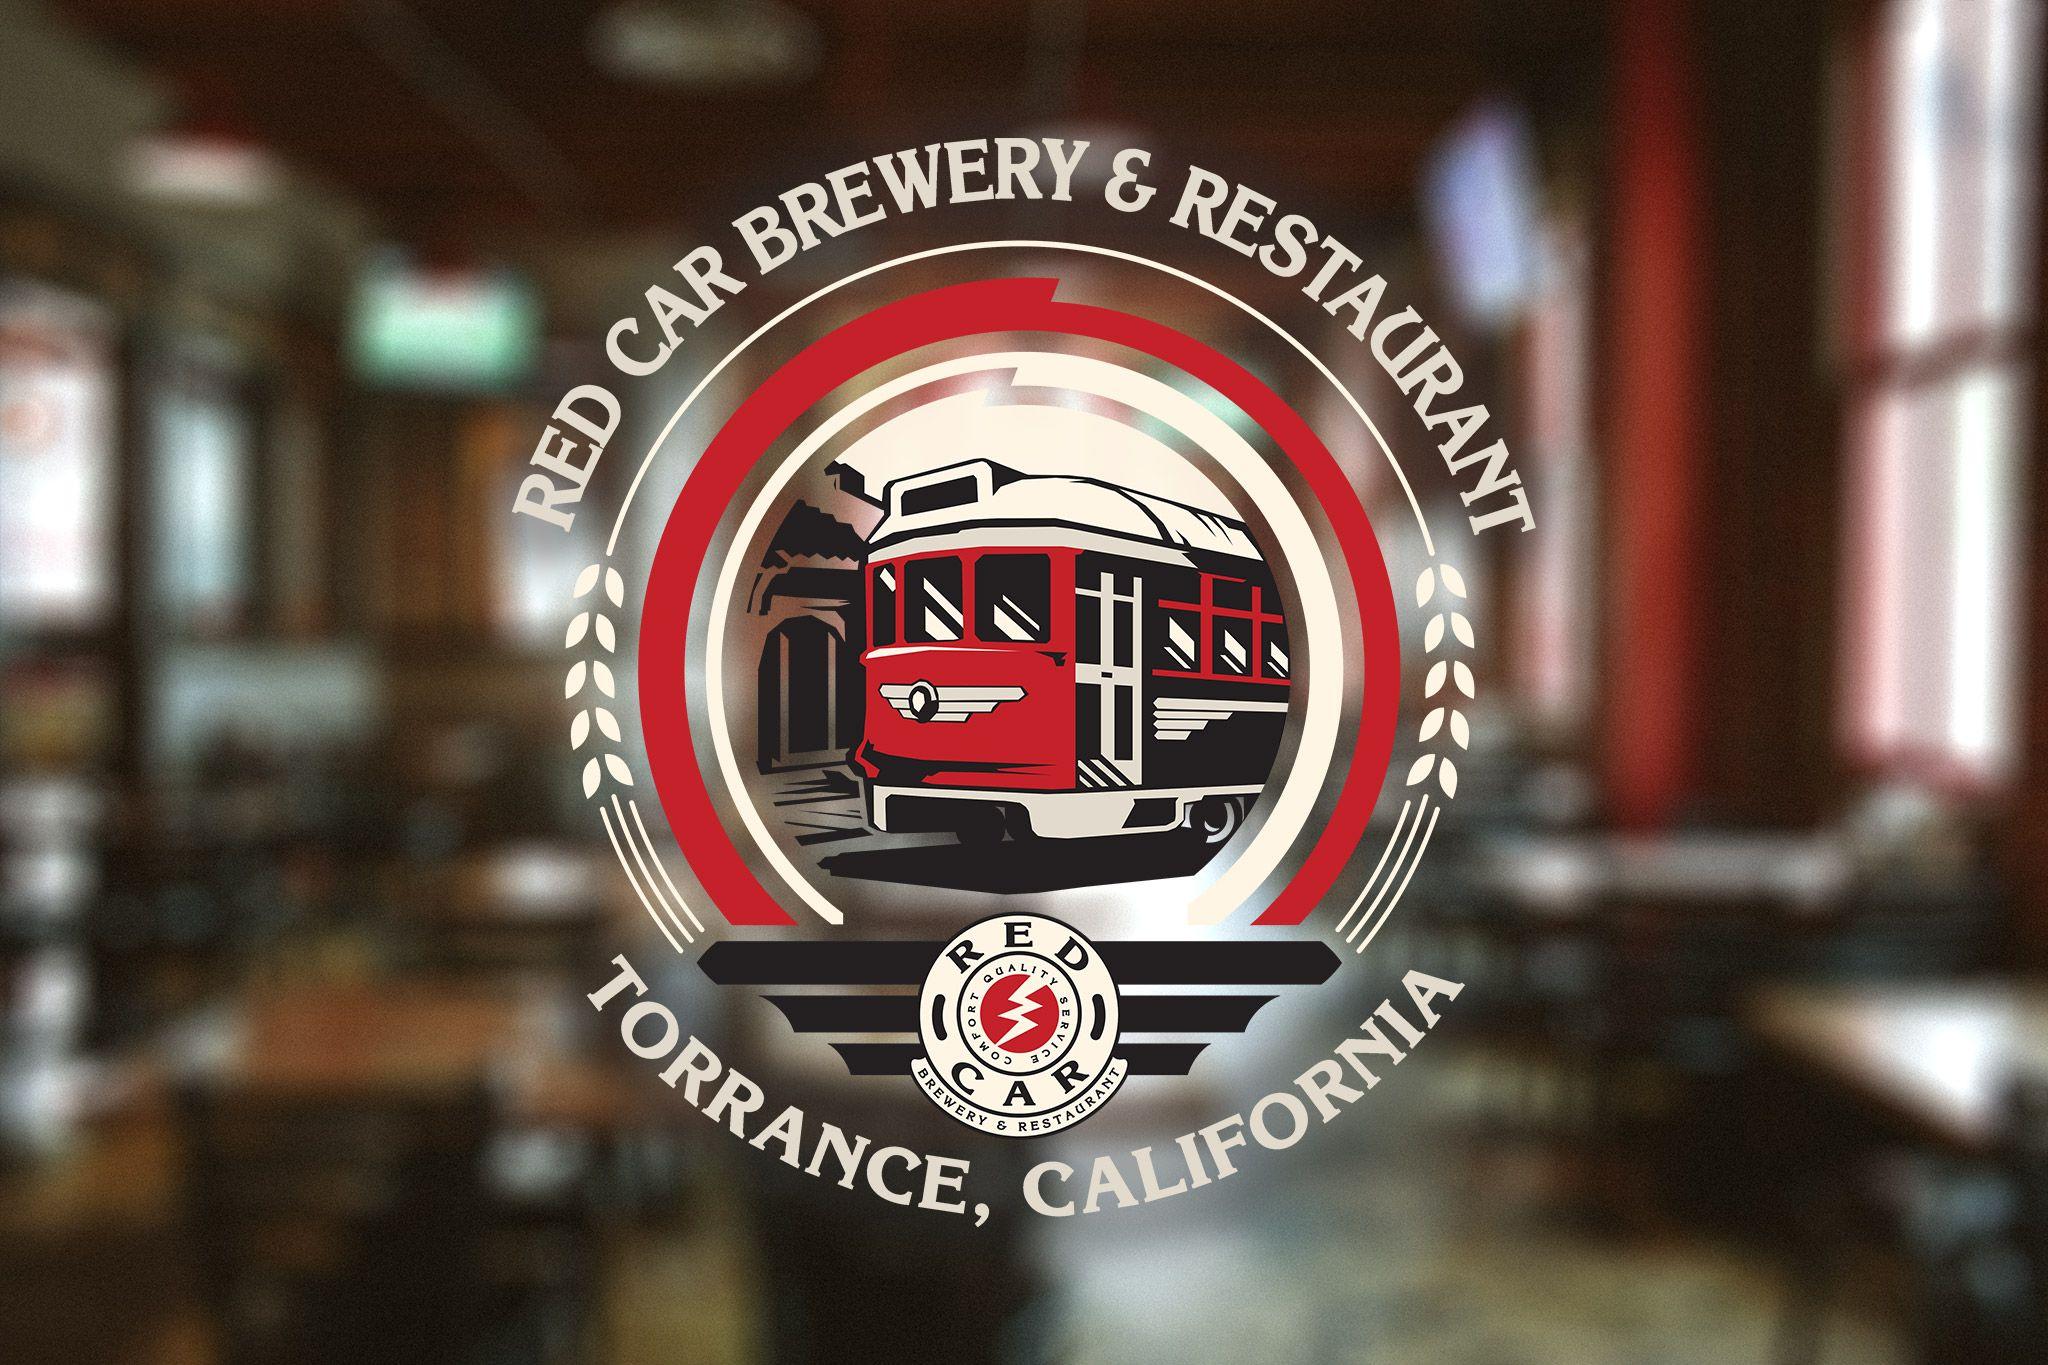 Reds Beer Logo - Red Car Brewery & Restaurant | Torrance, South Bay